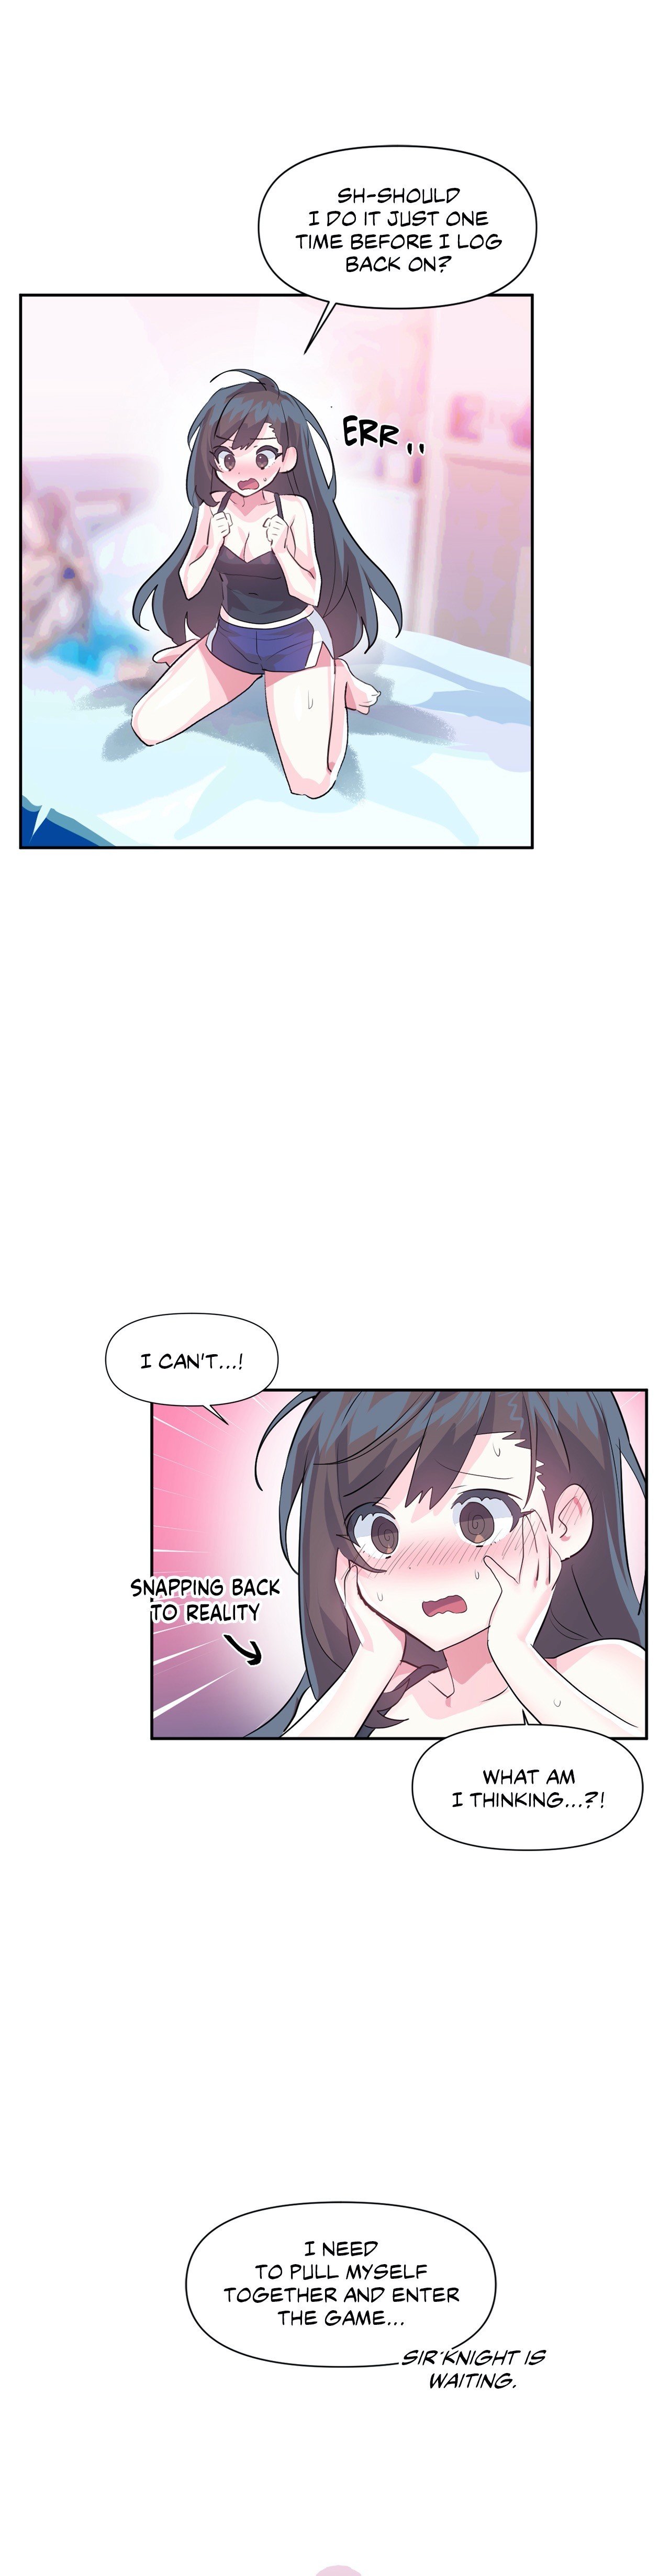 log-in-to-lust-a-land-chap-34-4